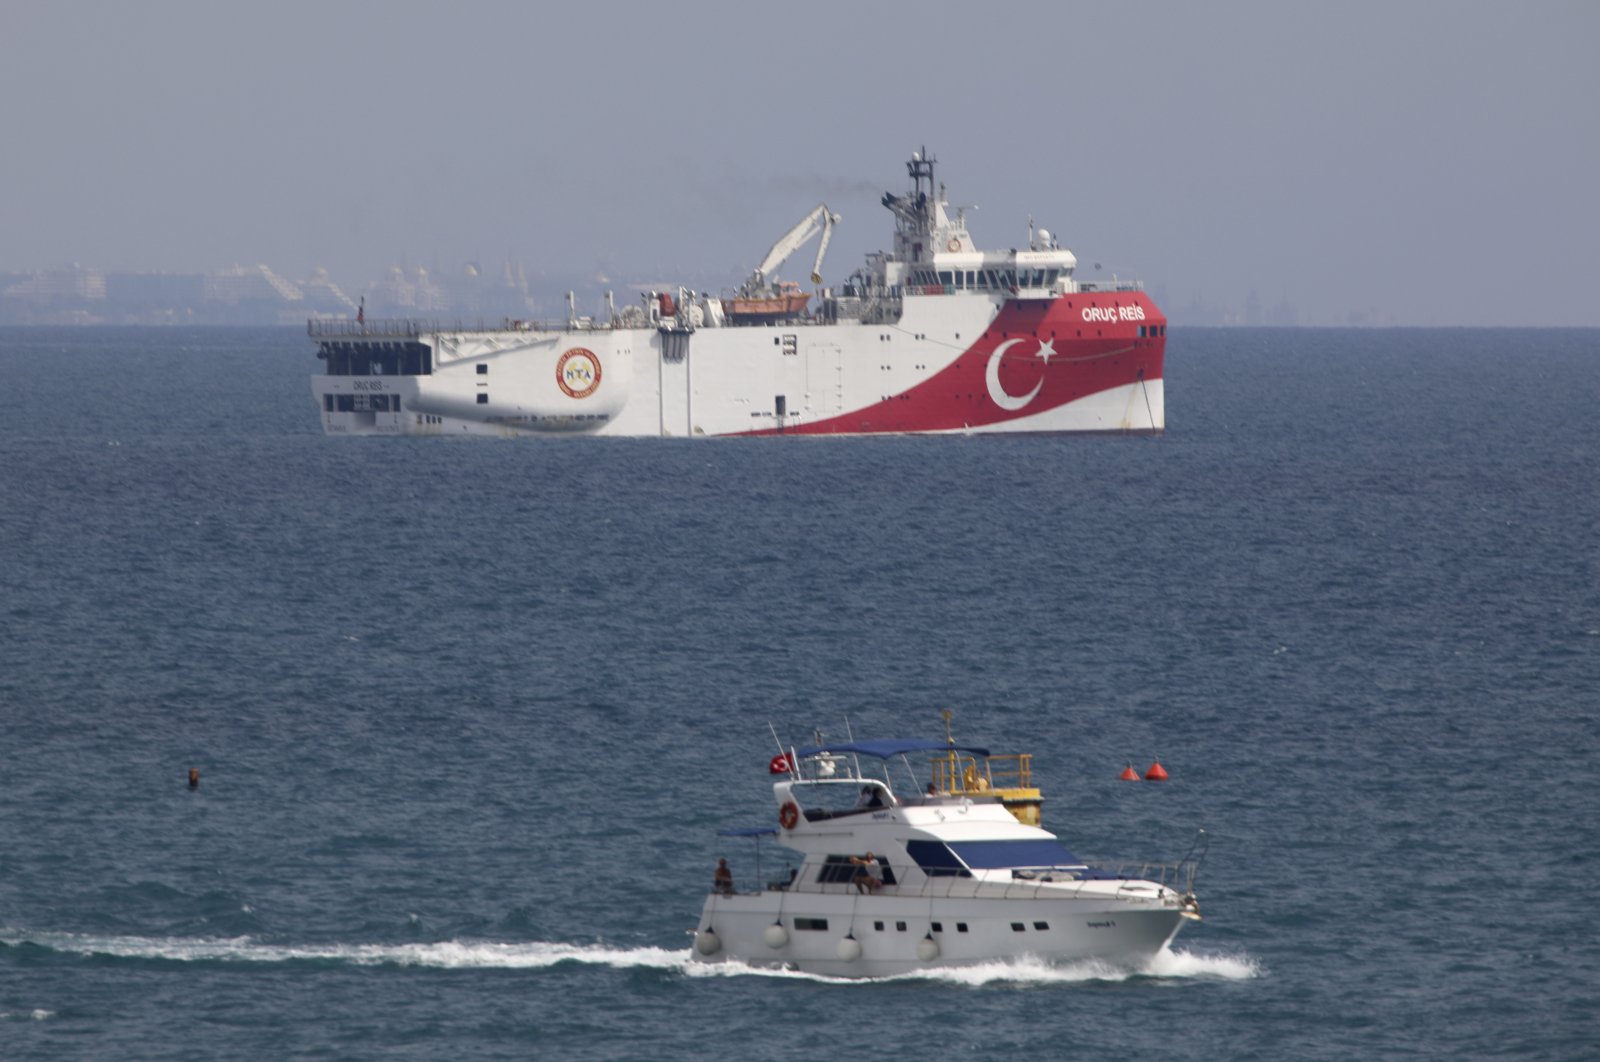 A view of Turkey's seismic research vessel, Oruç Reis anchored off the coast of Antalya on the Mediterranean, Turkey, Sept. 27, 2020. (AP Photo)